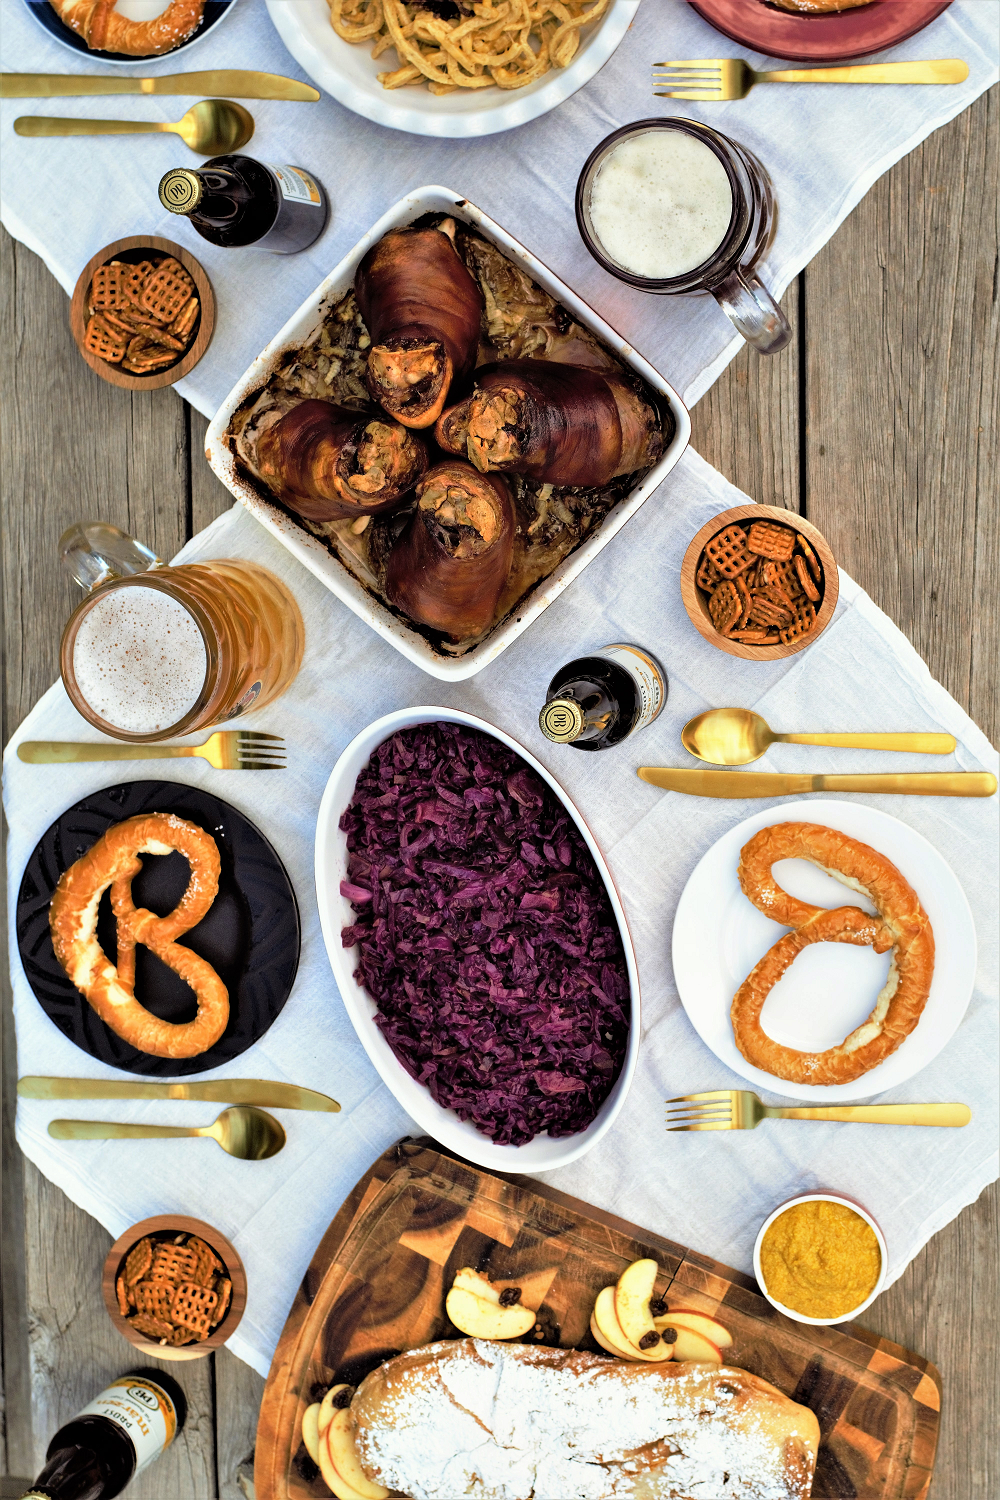 All-in-one guide for hosting your own Oktoberfest feast: roasted pork knuckle, sweet-tart red cabbage, cheesy noodle dumplings, & flaky apple strudel!